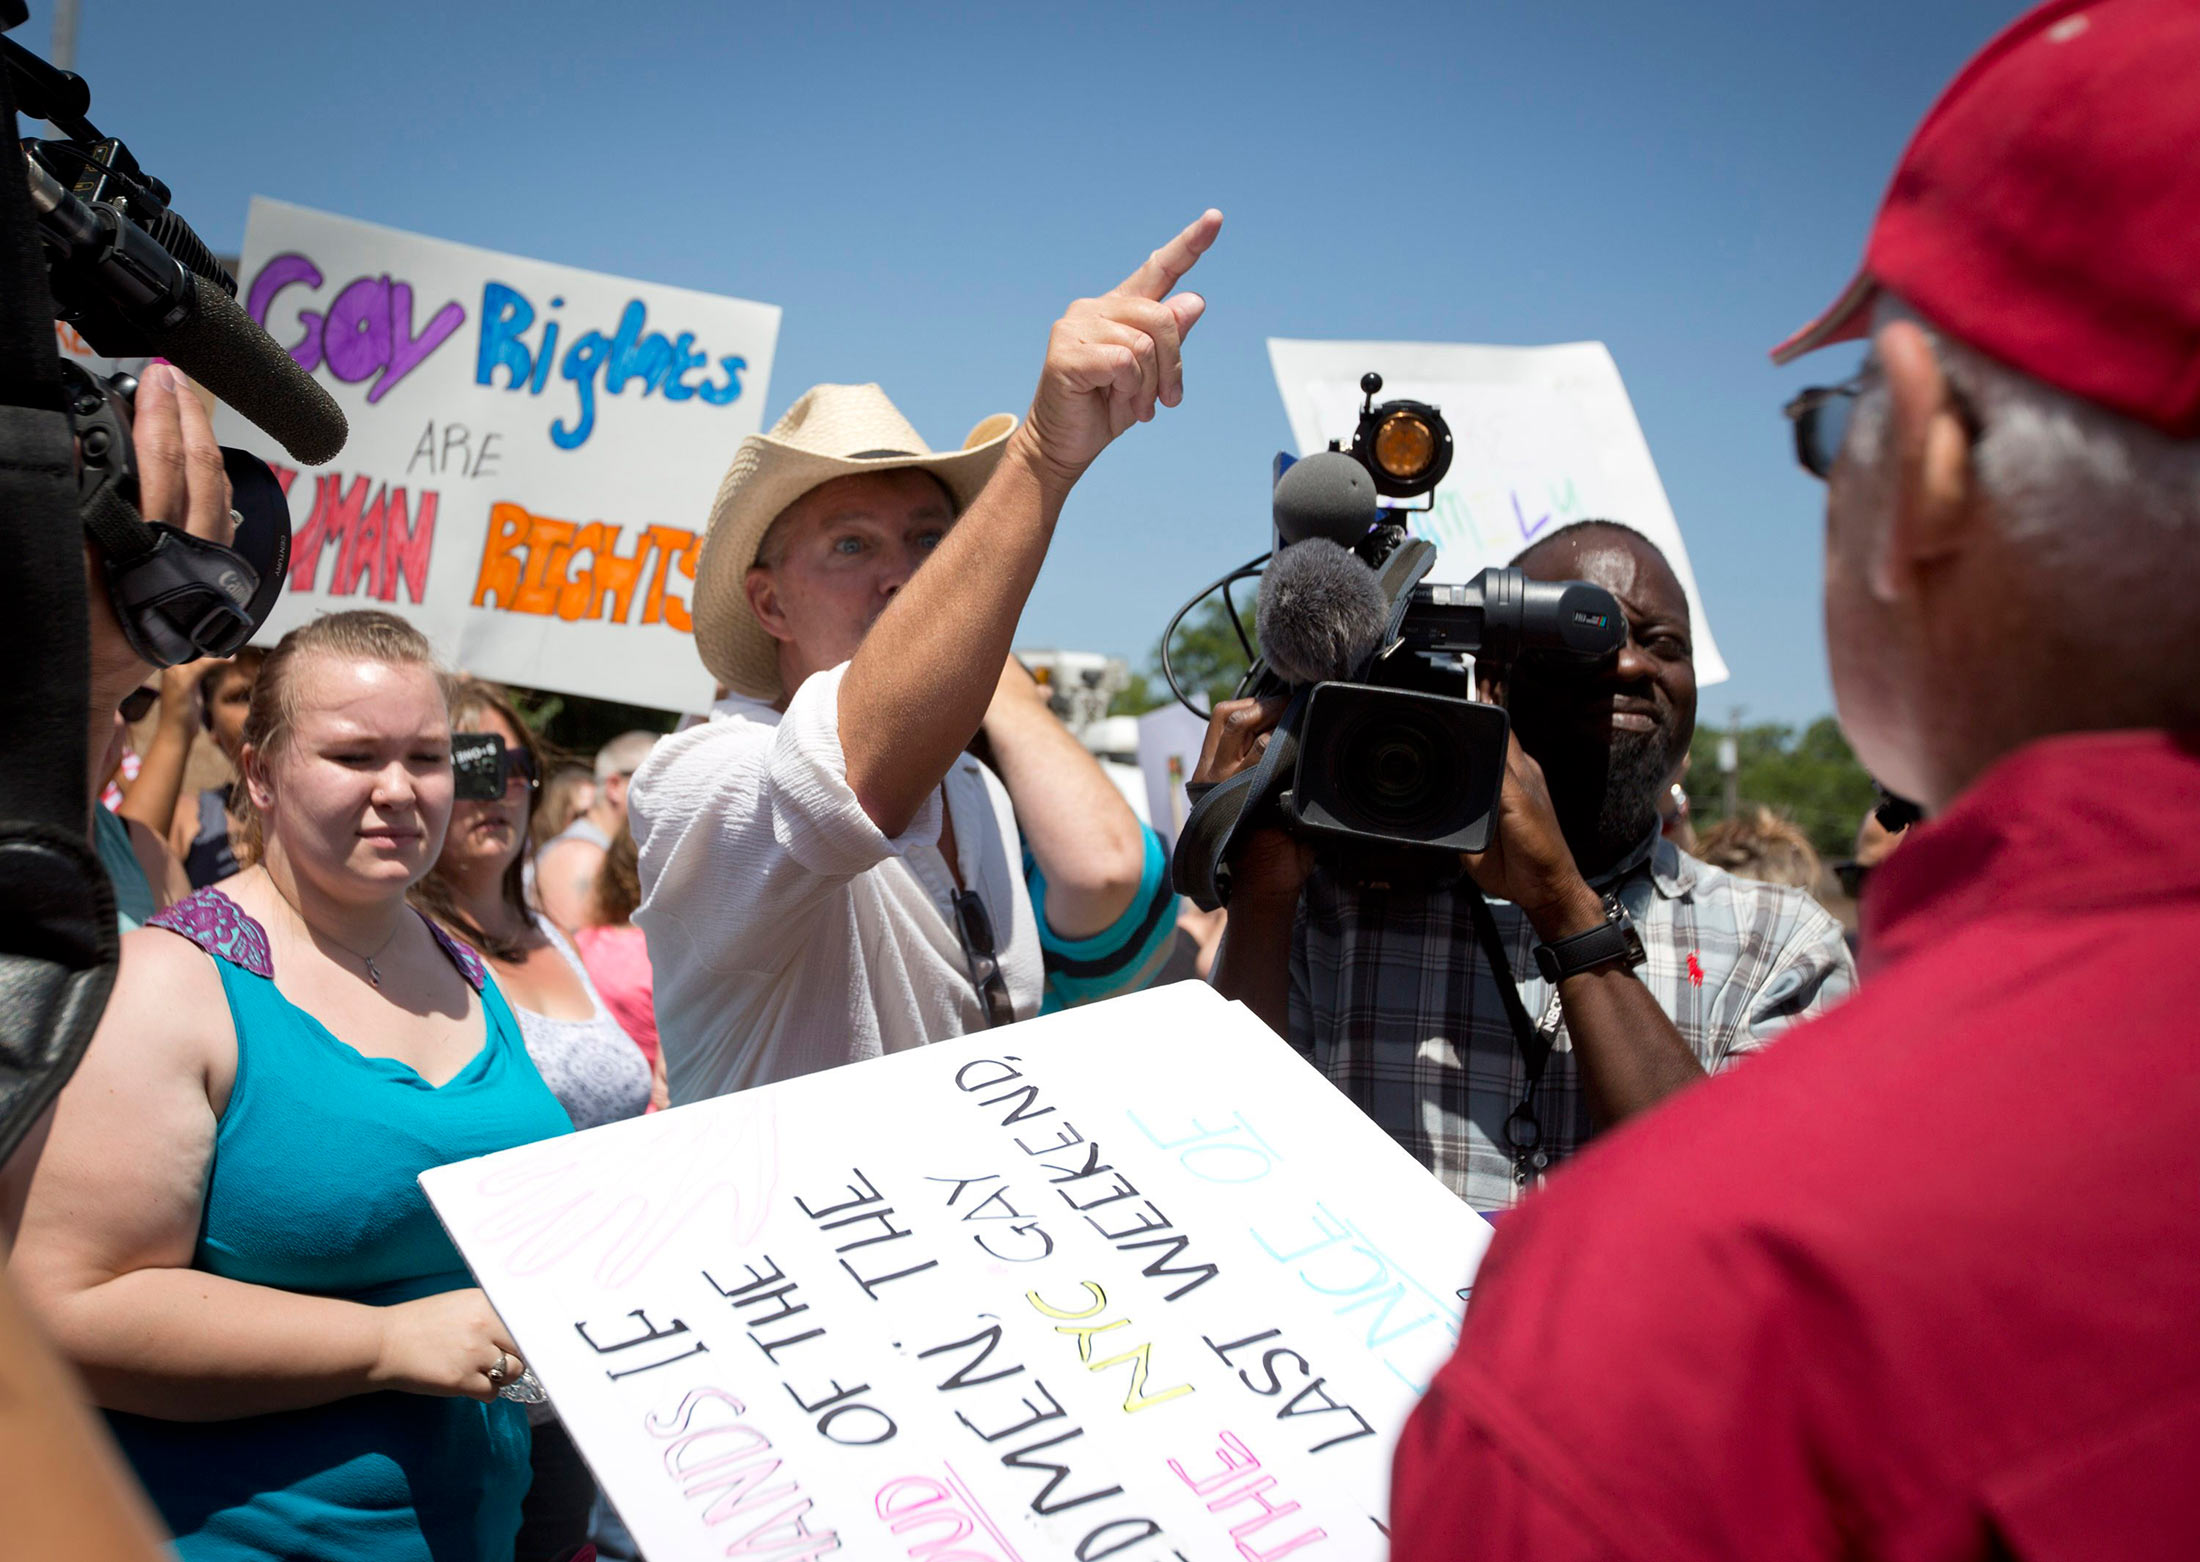 Joe Stapleton, center, and Neill Wilkerson, right, exchange words during at the courthouse in Granbury, Texas, on Thursday, July 2, 2015, amid dueling same-sex marriage rallies.
